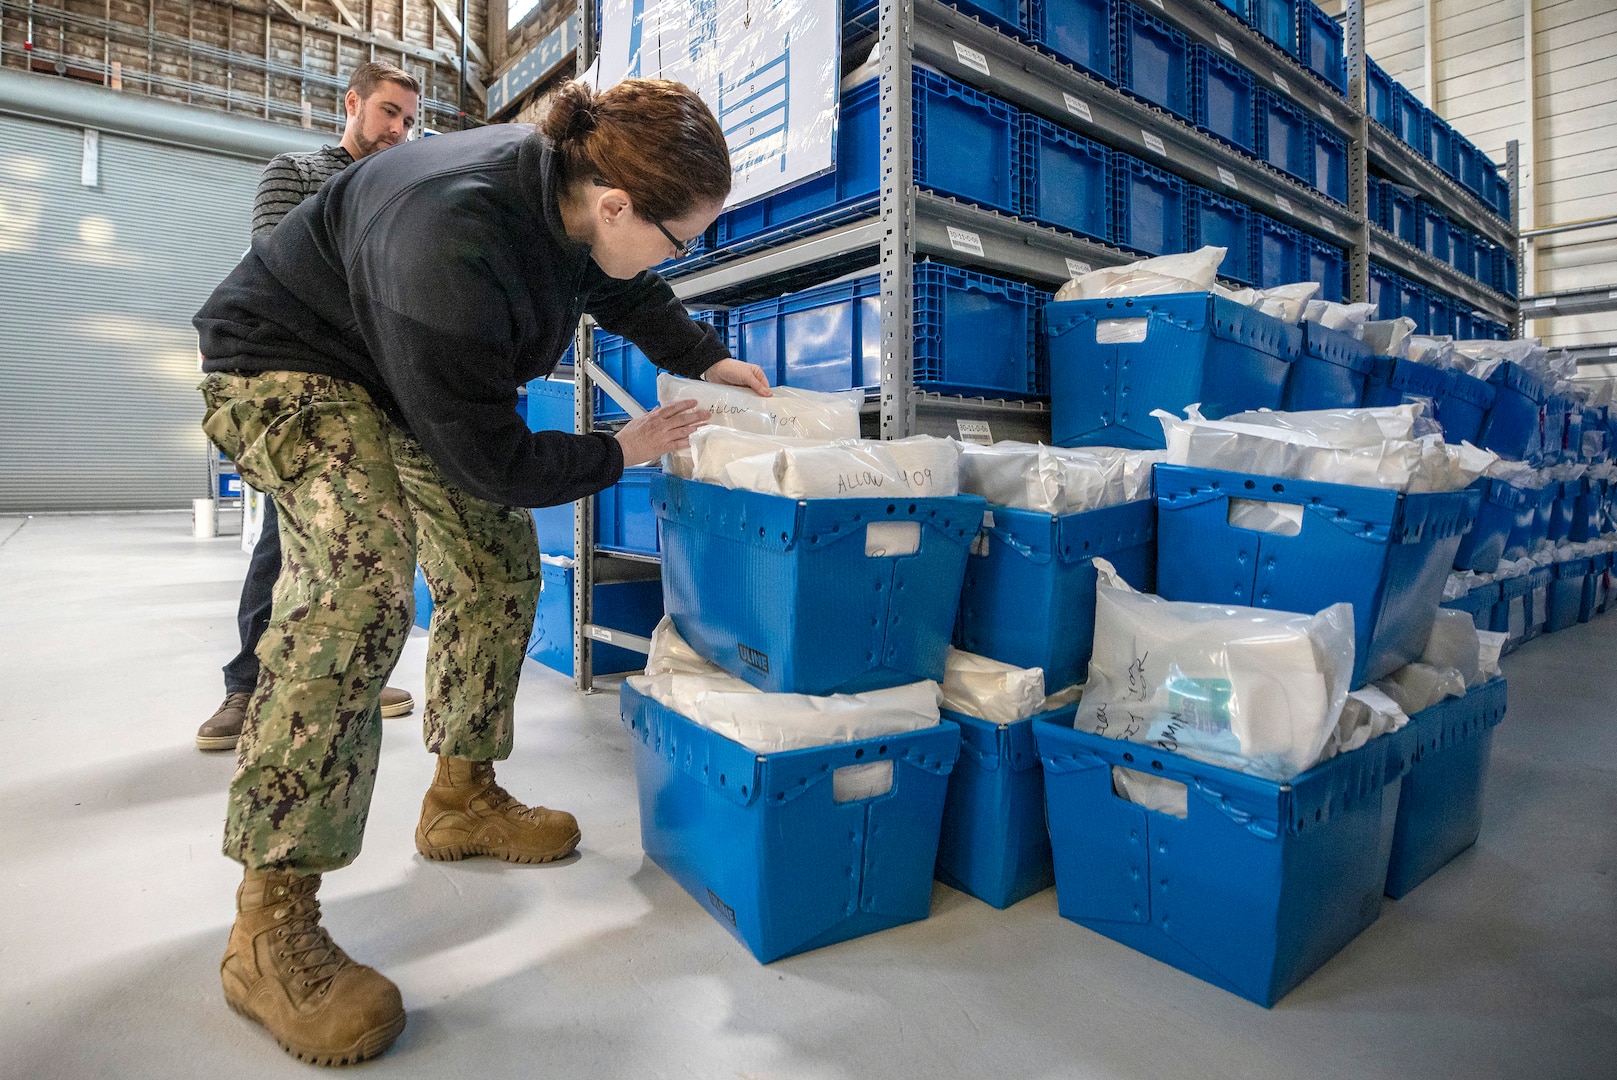 Capt. Dianna Wolfson, commander, Puget Sound Naval Shipyard & Intermediate Maintenance Facility inspects cleaning kits to be distributed through the shipyard. Employees from Puget Sound Naval Shipyard & Intermediate Maintenance Facility worked throughout the weekend to put together more than 2,000 cleaning kits to use around the command in an effort to amplify sanitation efforts during the COVID-19 pandemic.